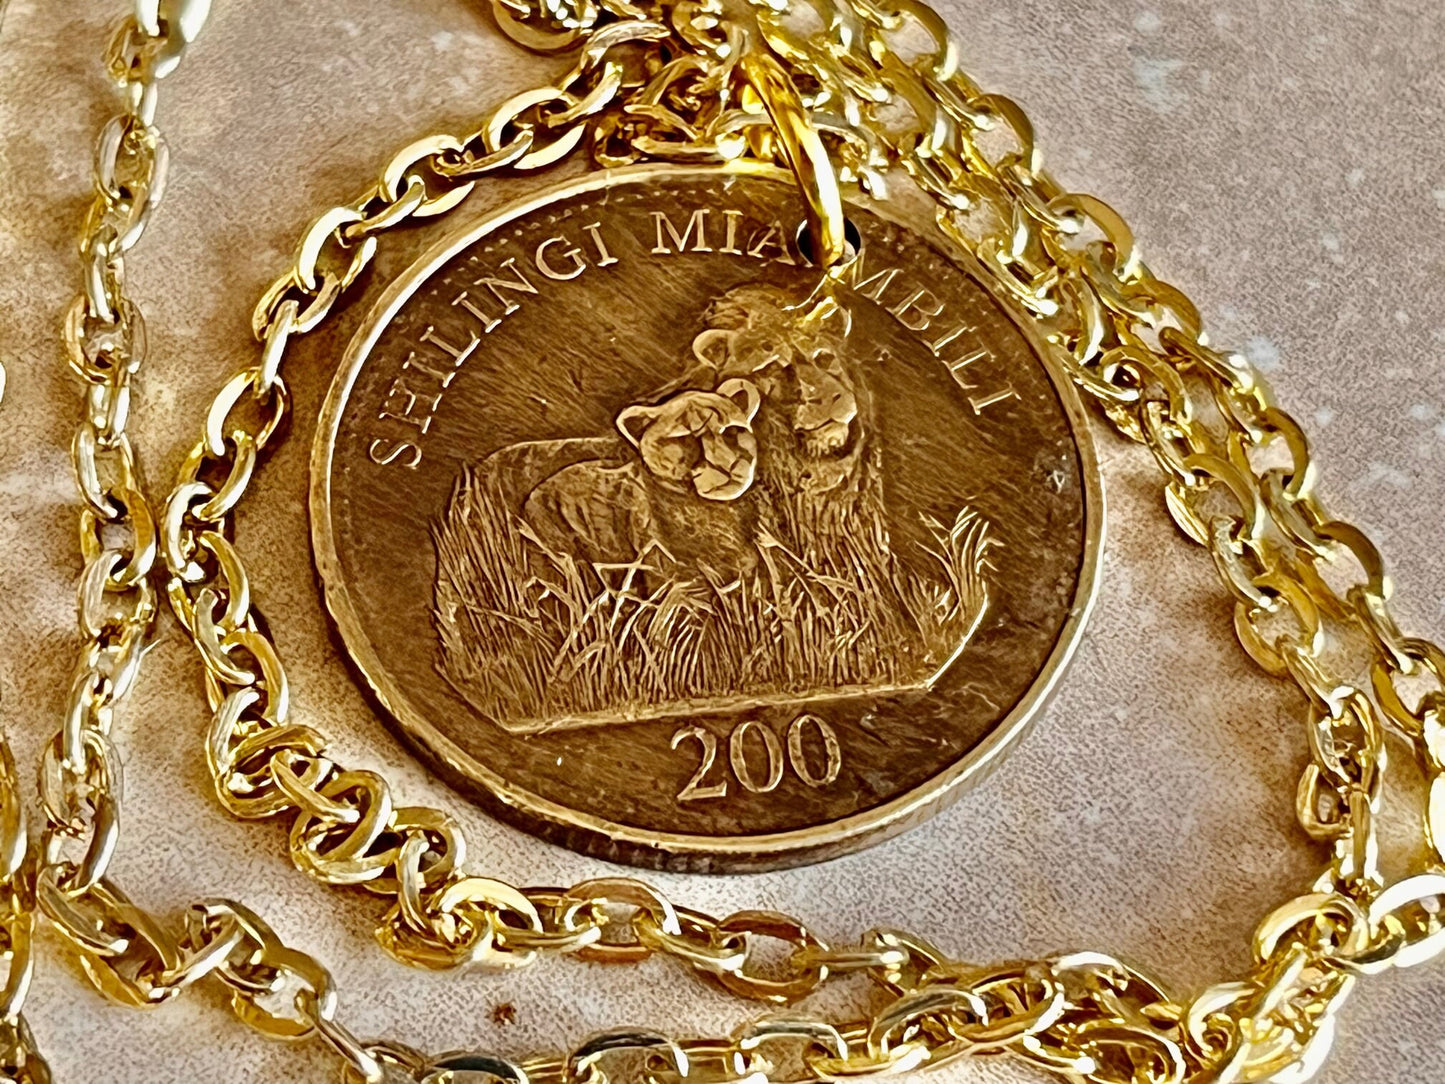 South Africa Coin Necklace 200 Shilling Cents African Pendant Personal Handmade Jewelry Gift Friend Charm For Him Her World Coin Collector